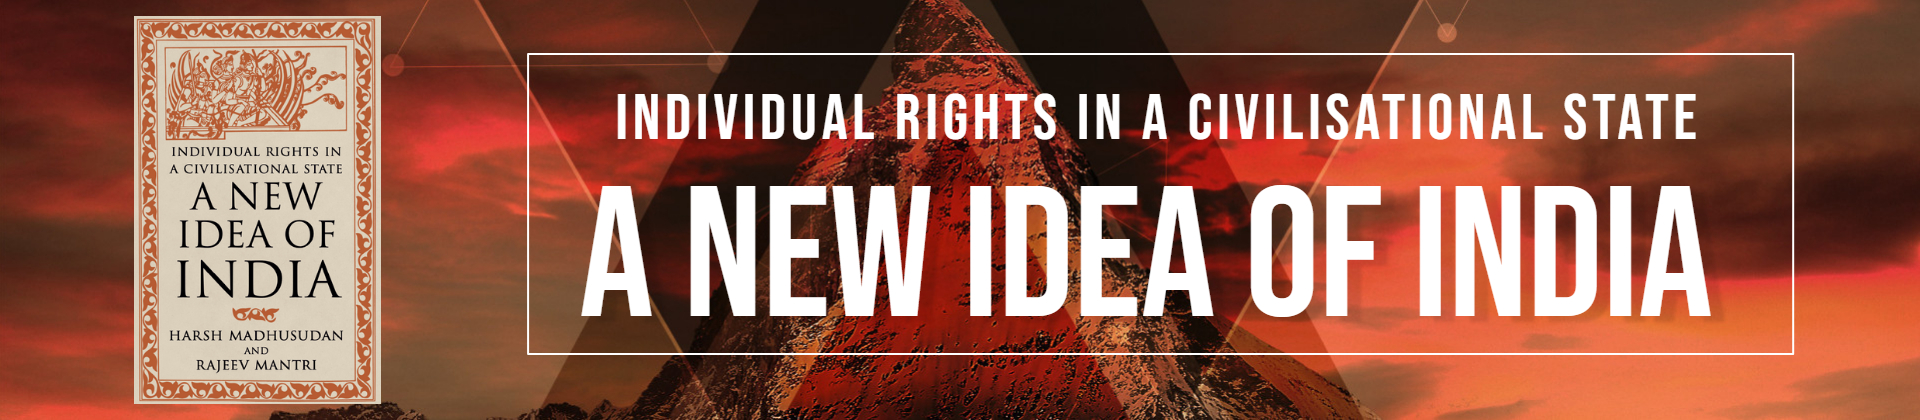 Book Discussion | A New Idea of India — Individual Rights in A Civilisational State